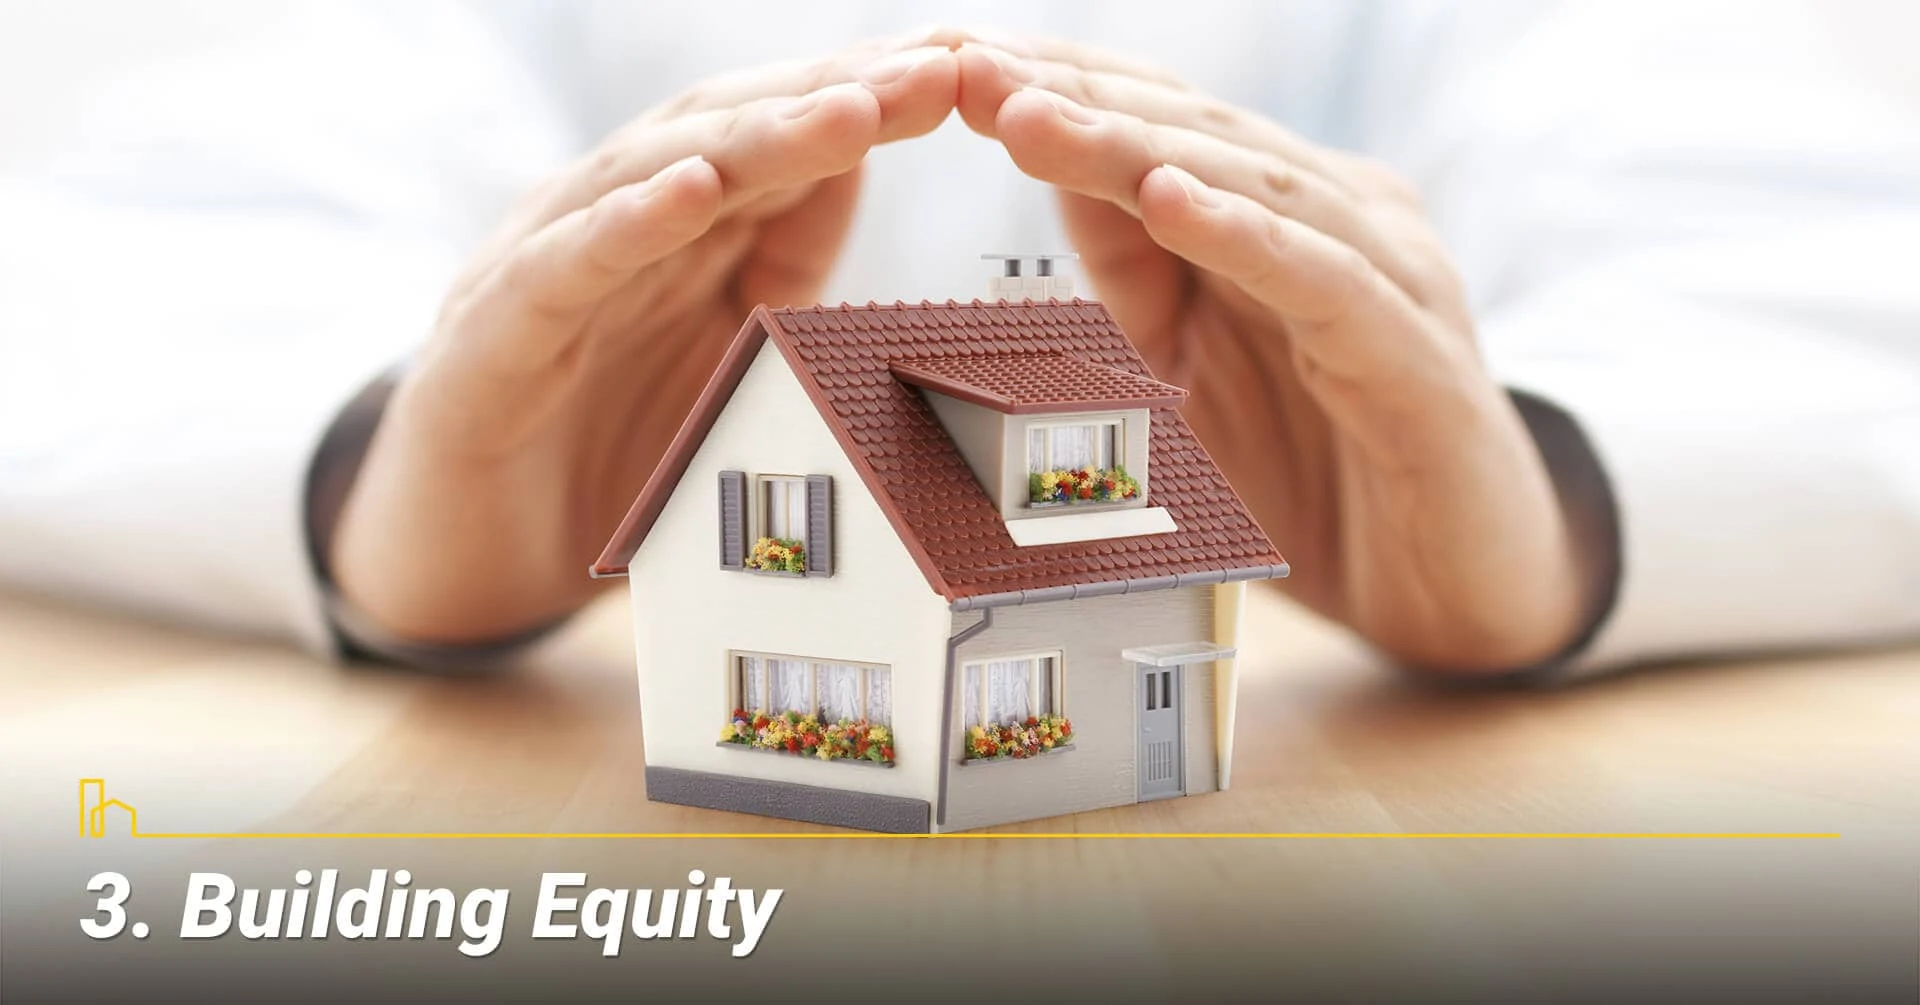 Building Equity, building wealth